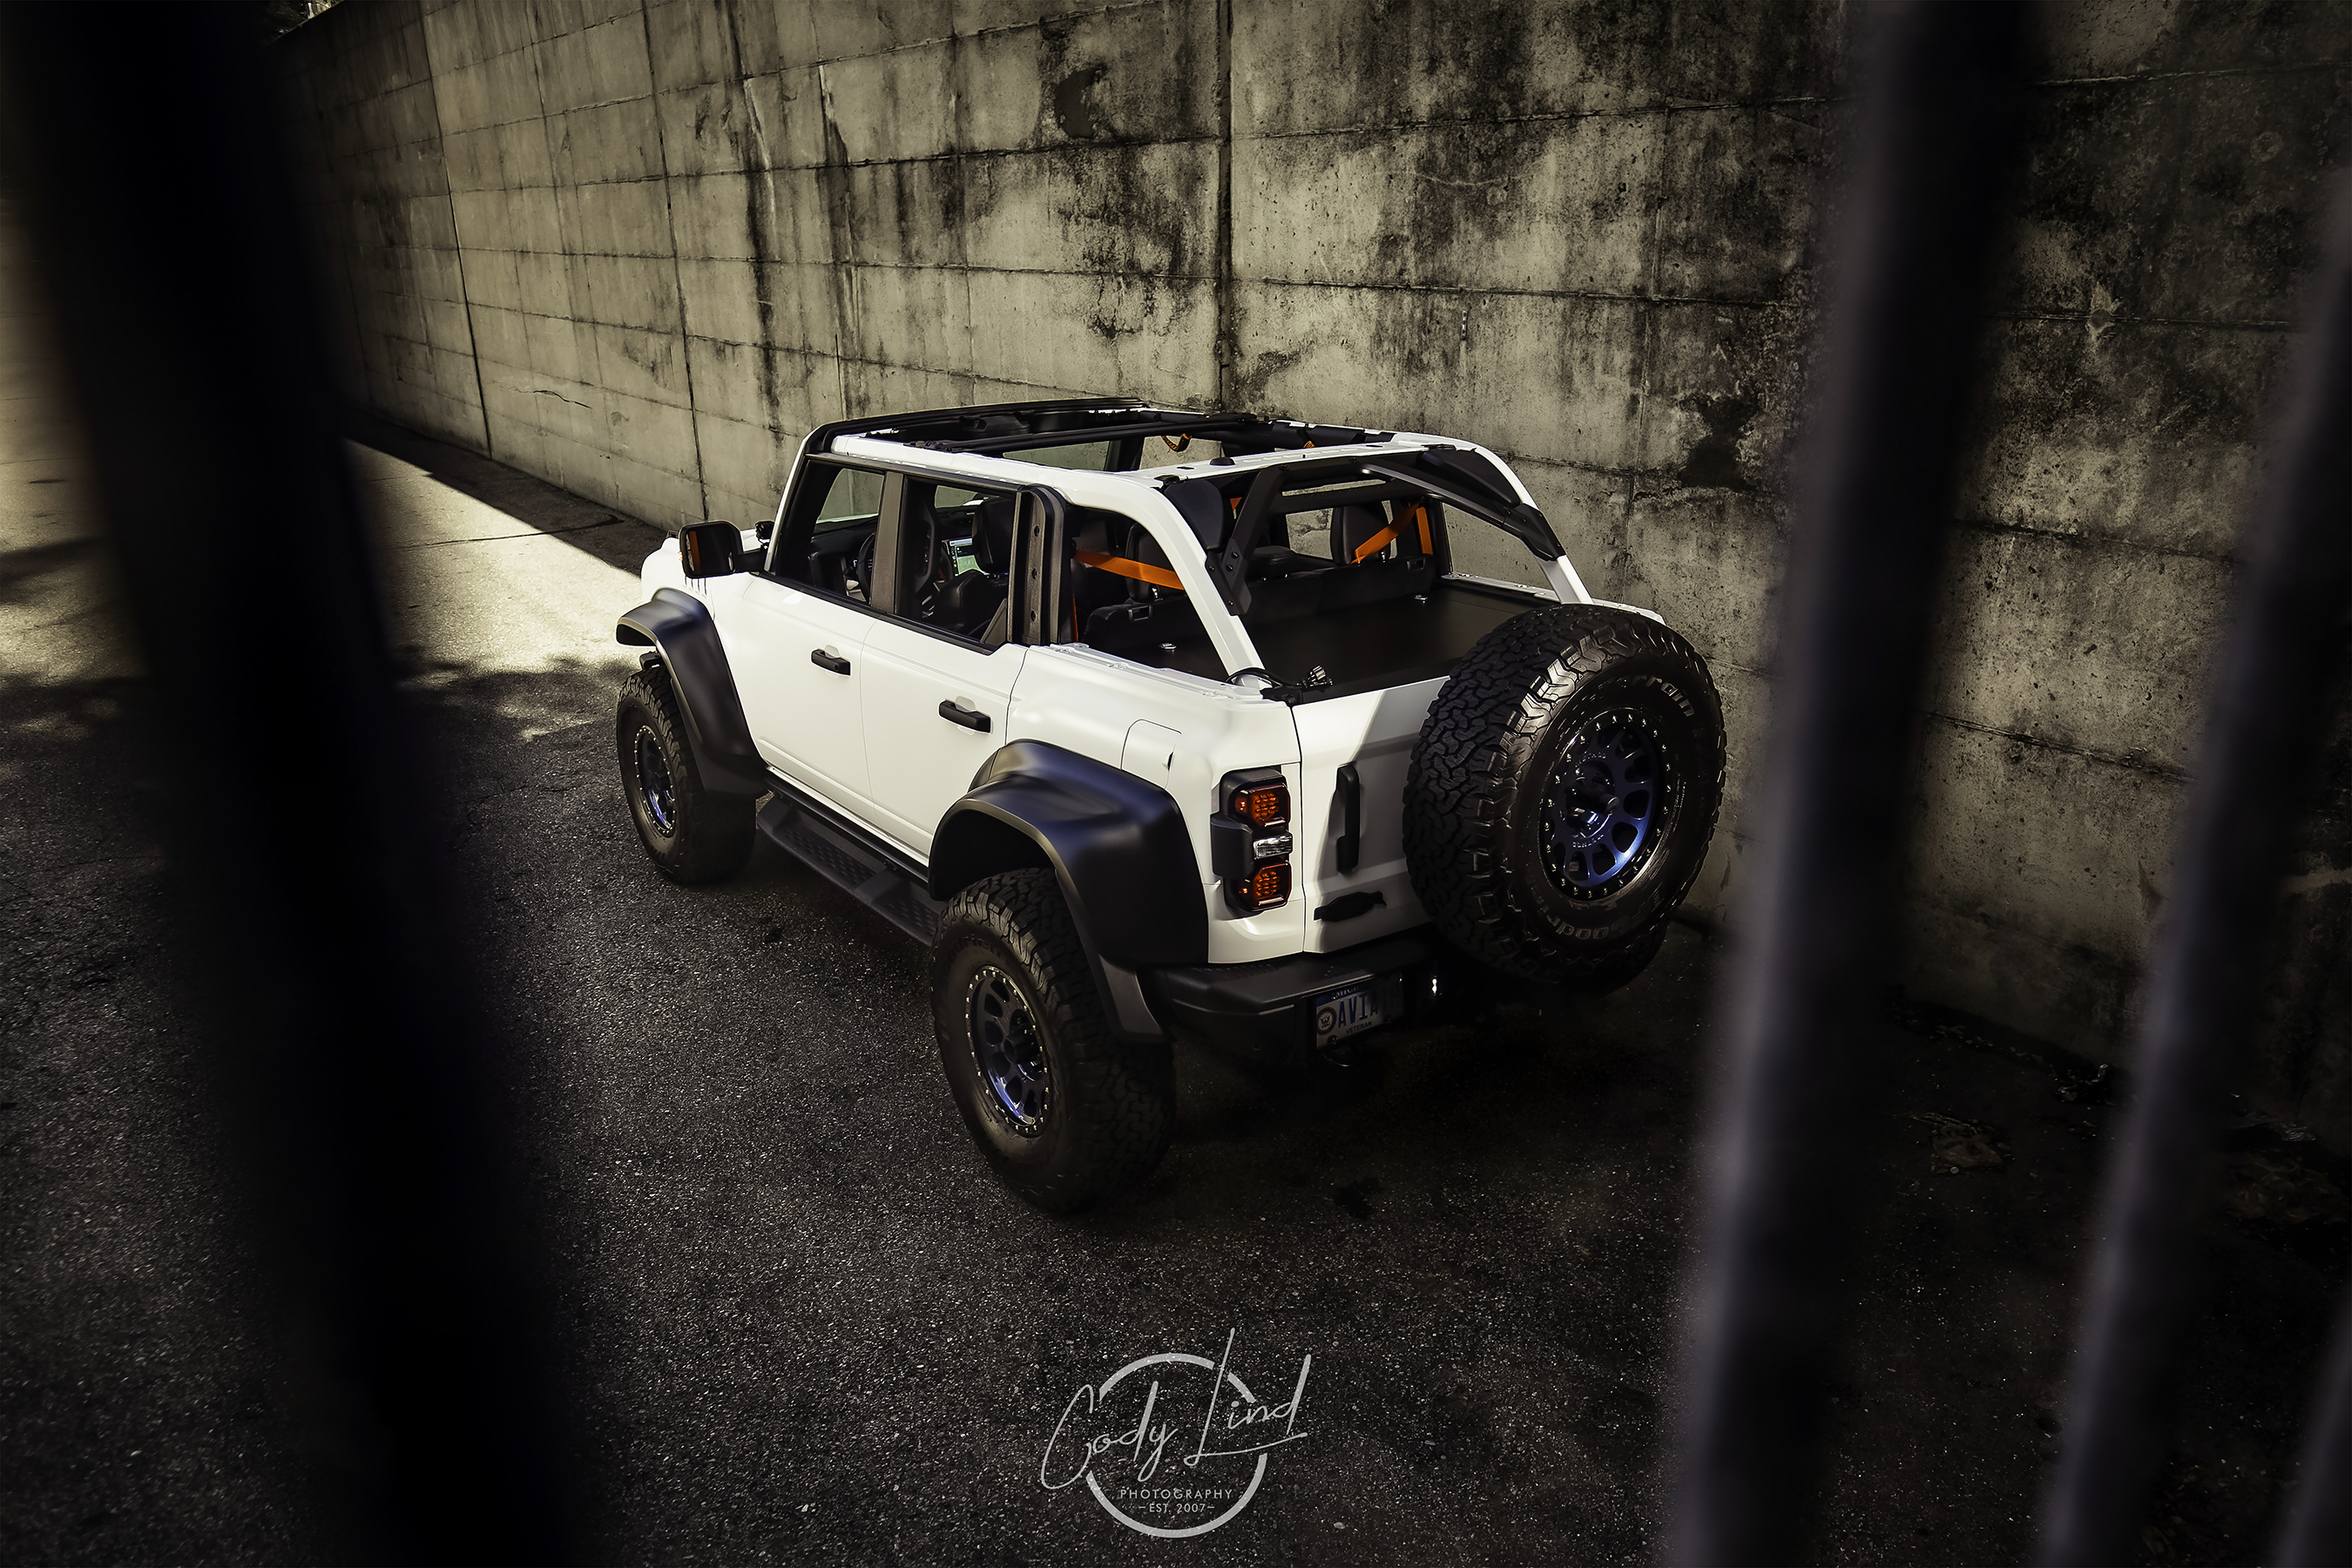 Ford Bronco Bronco Raptor in Oxford White - Professional photo shoot.  Credits:  the Very talented Cody Lind https://codylindphotography.com/ IMG_9854